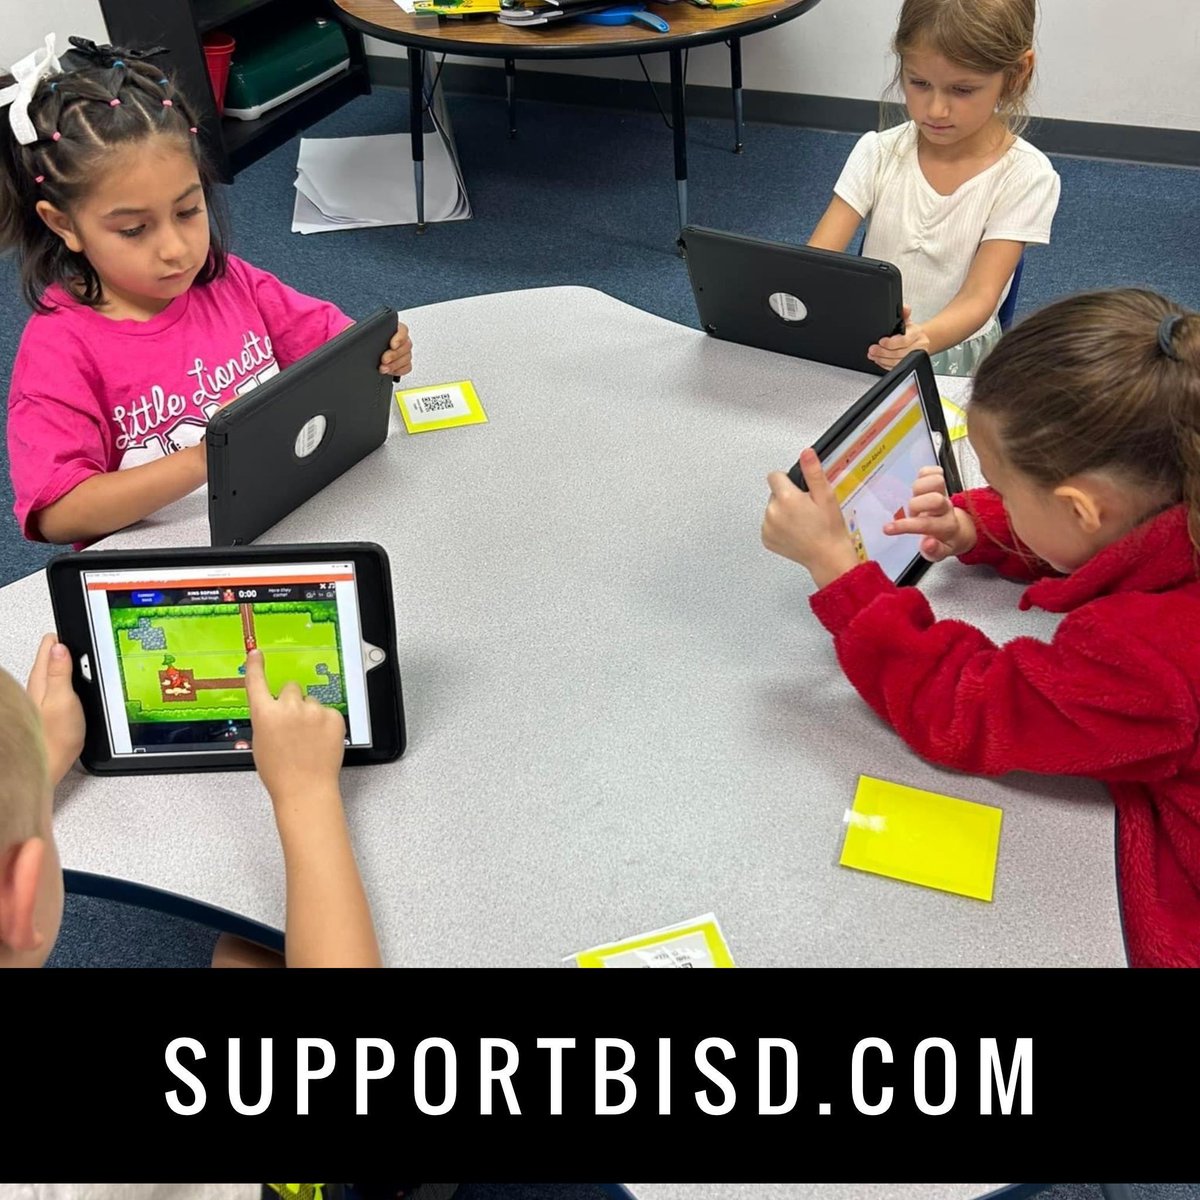 Unlocking the full potential of education through action! Join us in supporting the BEF and help create positive educational opportunities for BISD students. SupportBISD.com #bef1883 #steminschool #teachergrants